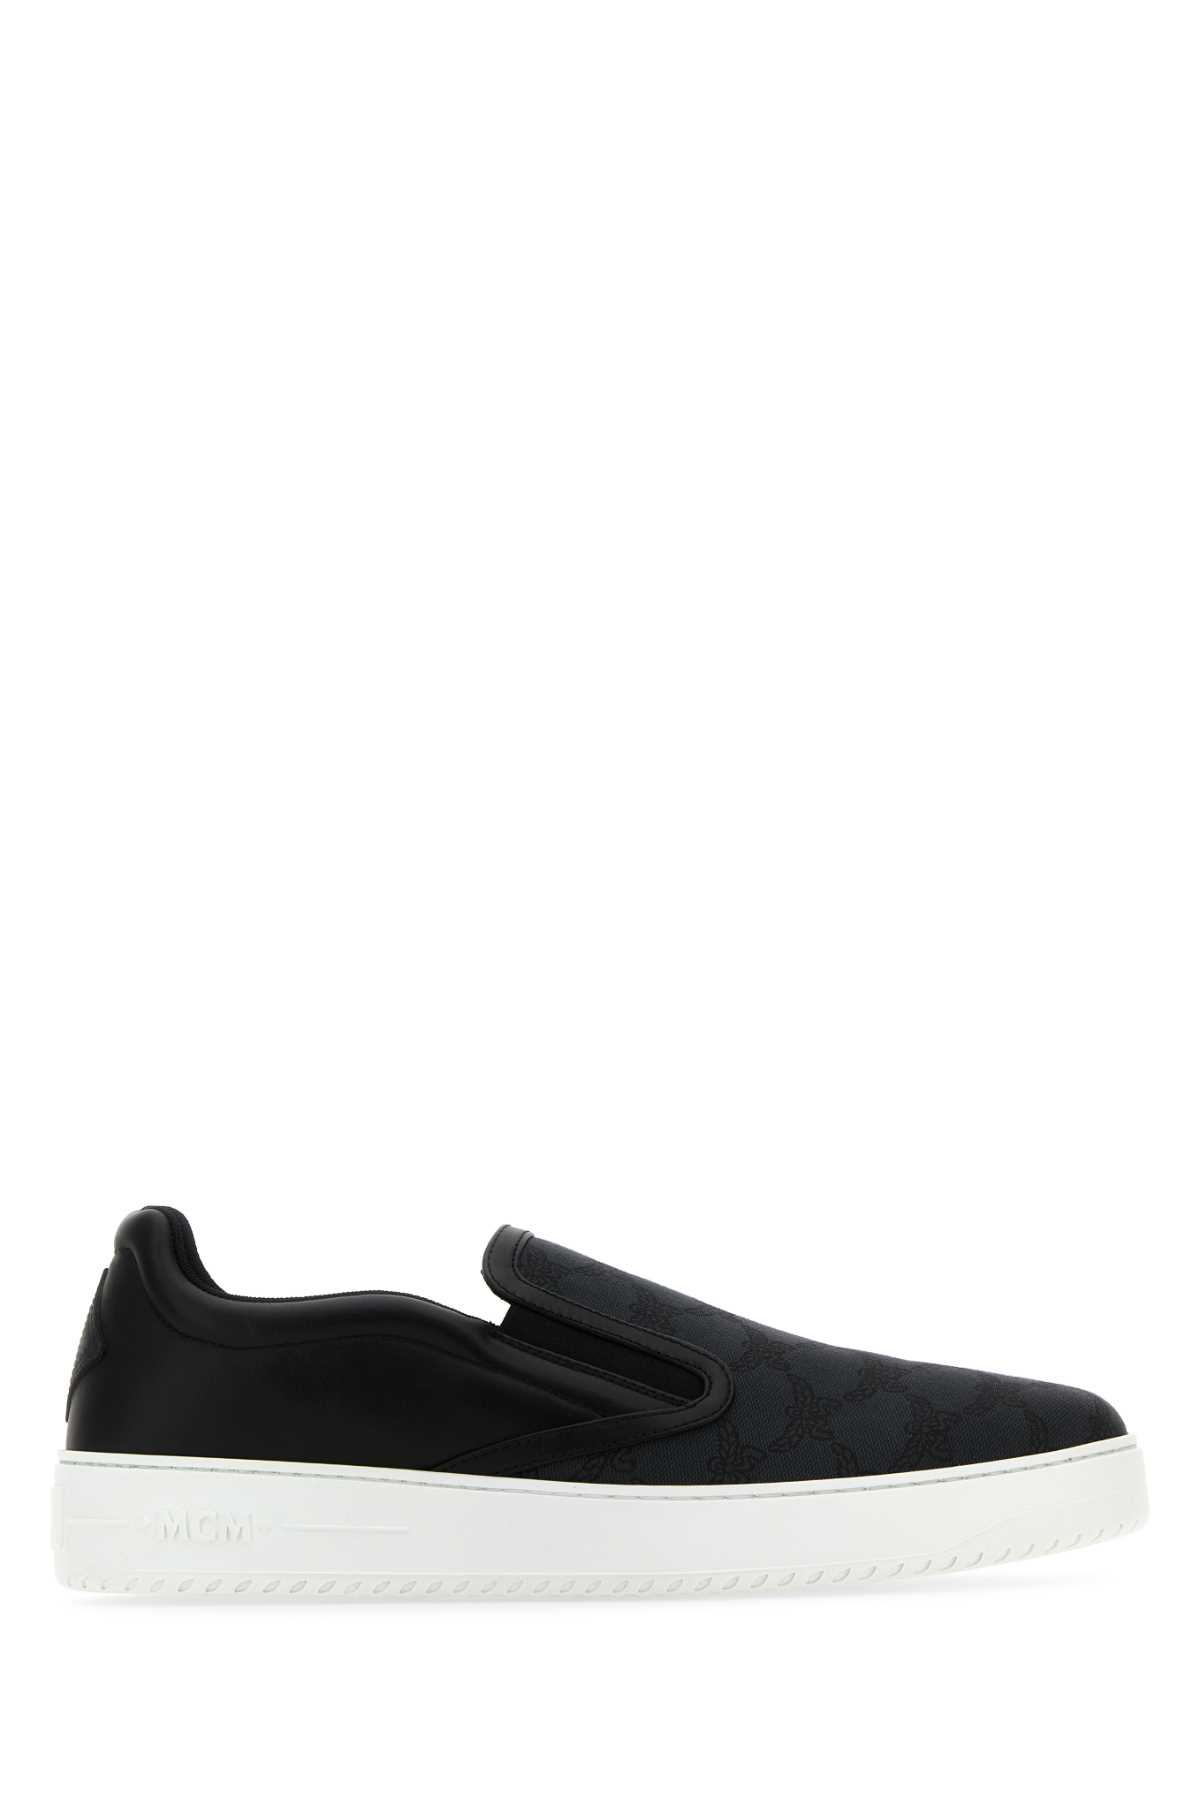 Black Canvas And Leather Neo Terrain Slip Ons